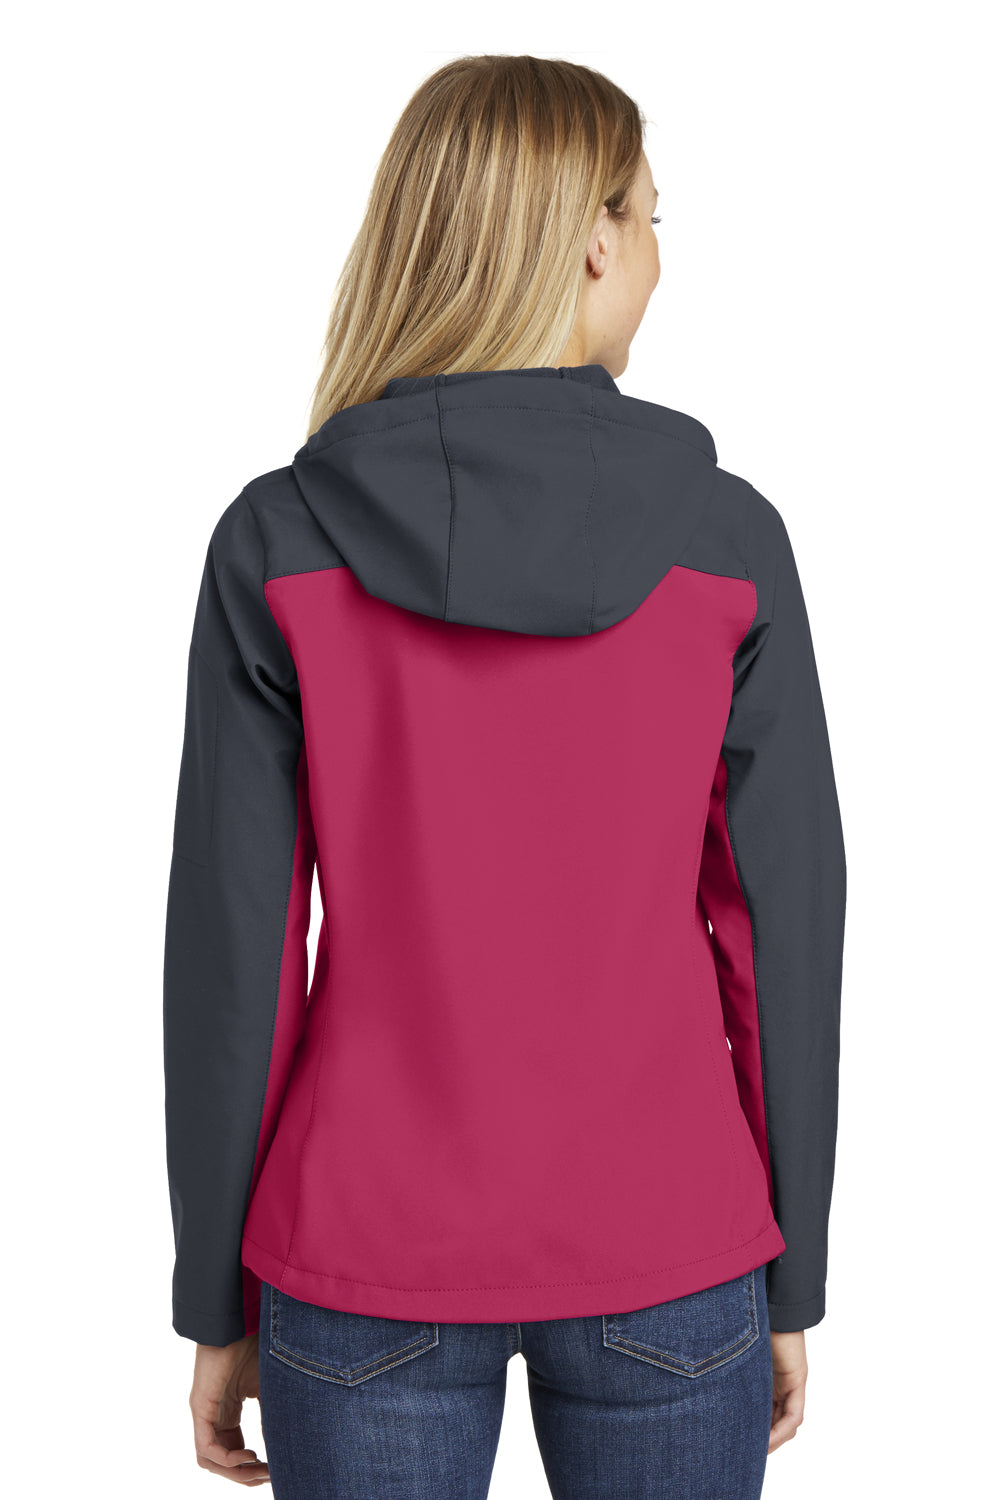 Port Authority L335 Womens Core Wind & Water Resistant Full Zip Hooded Jacket Fuchsia Pink/Grey Back